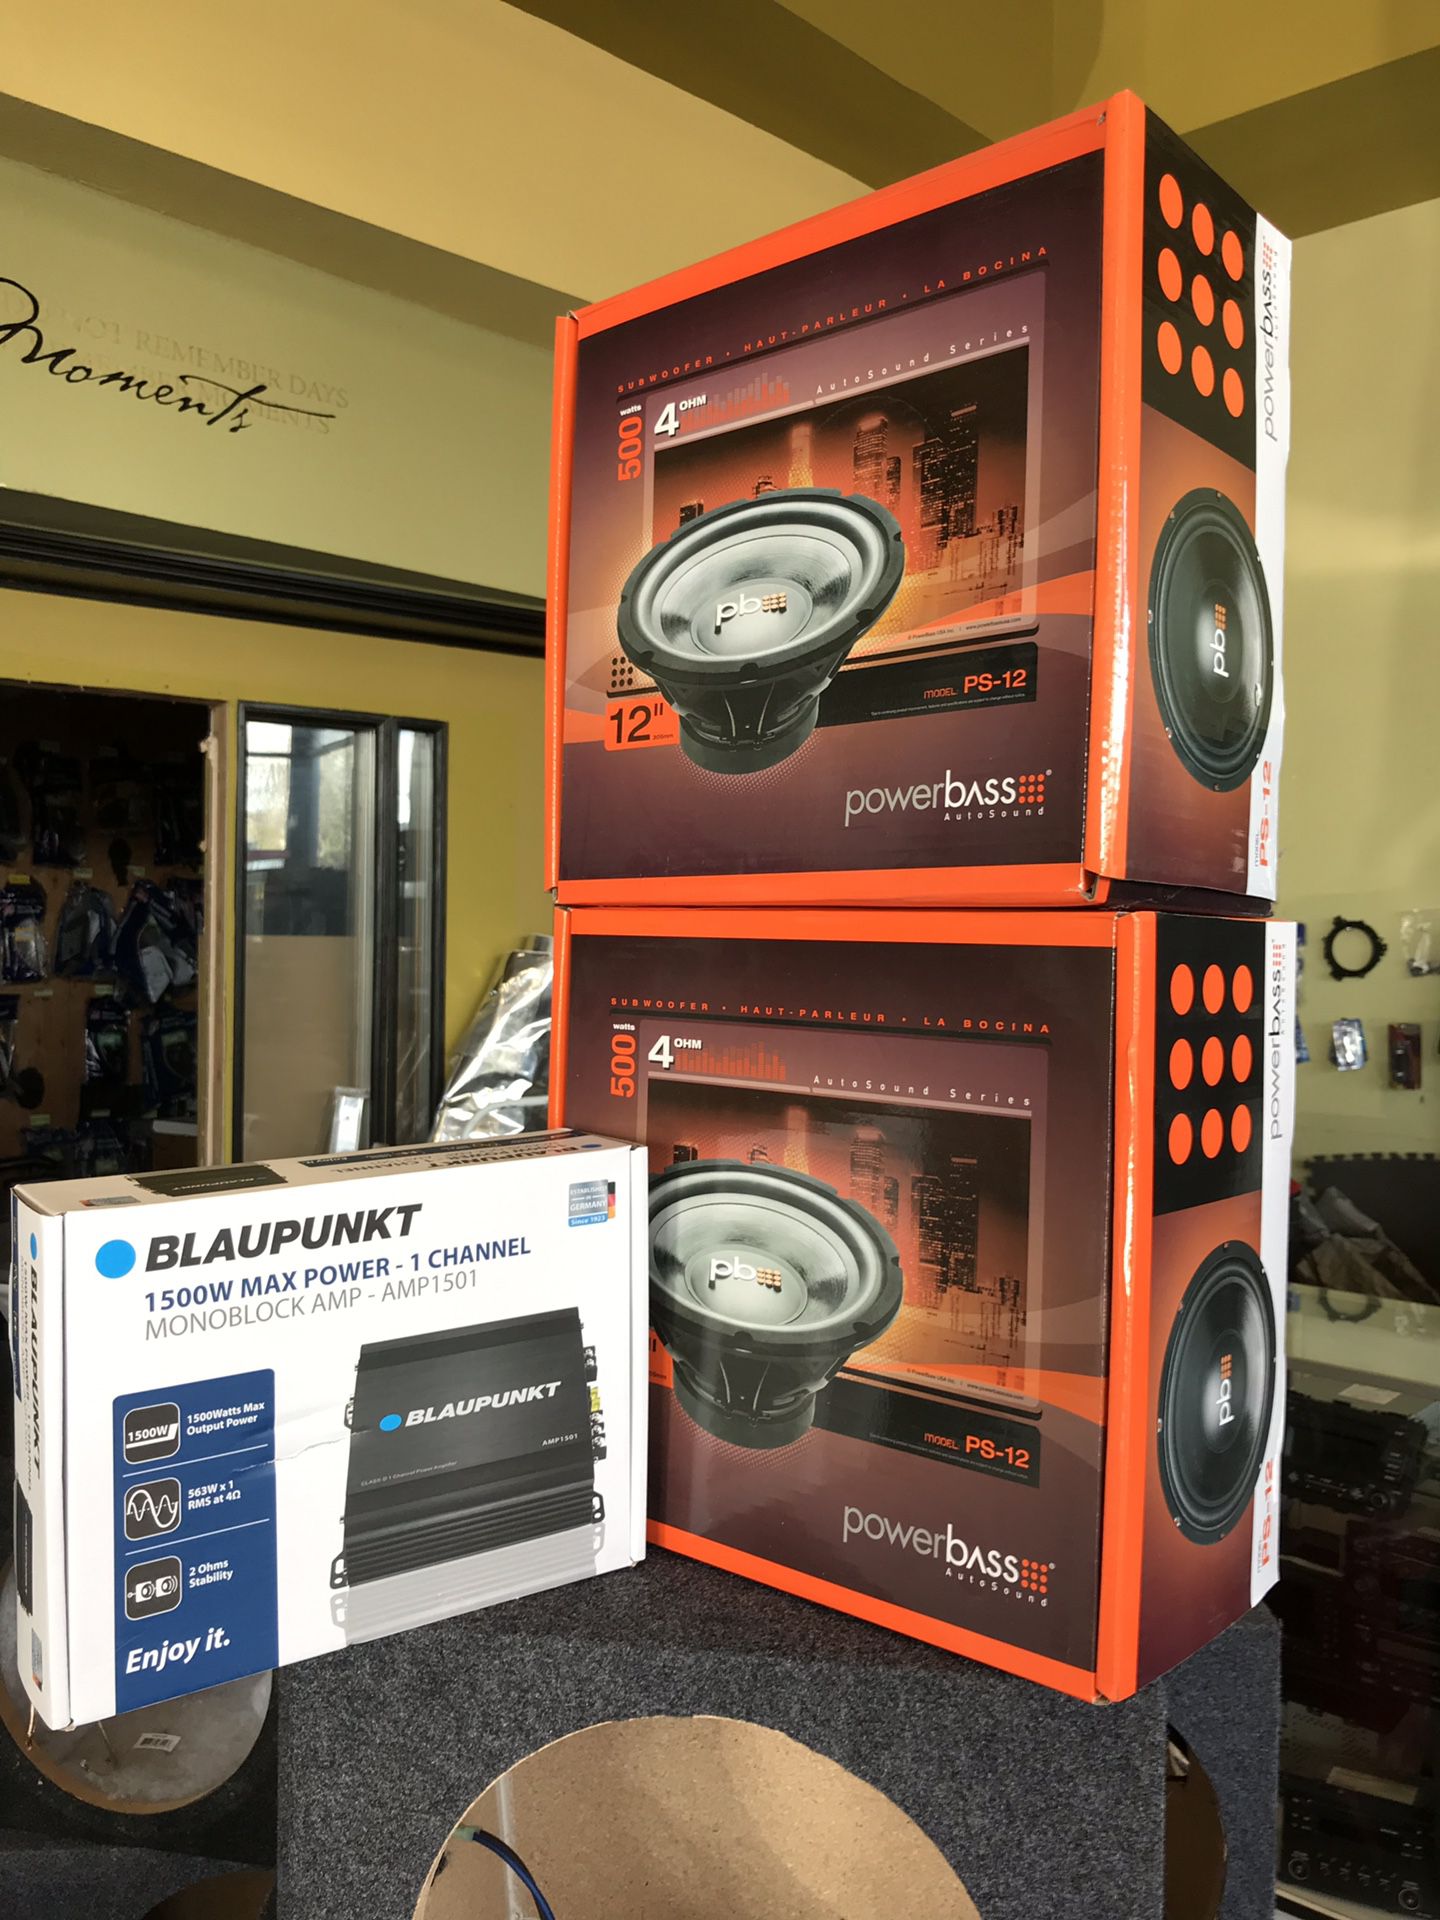 Car audio bundle deal 2 12” subwoofer. With 1500w amplifier finance available 100 days to pay no interest